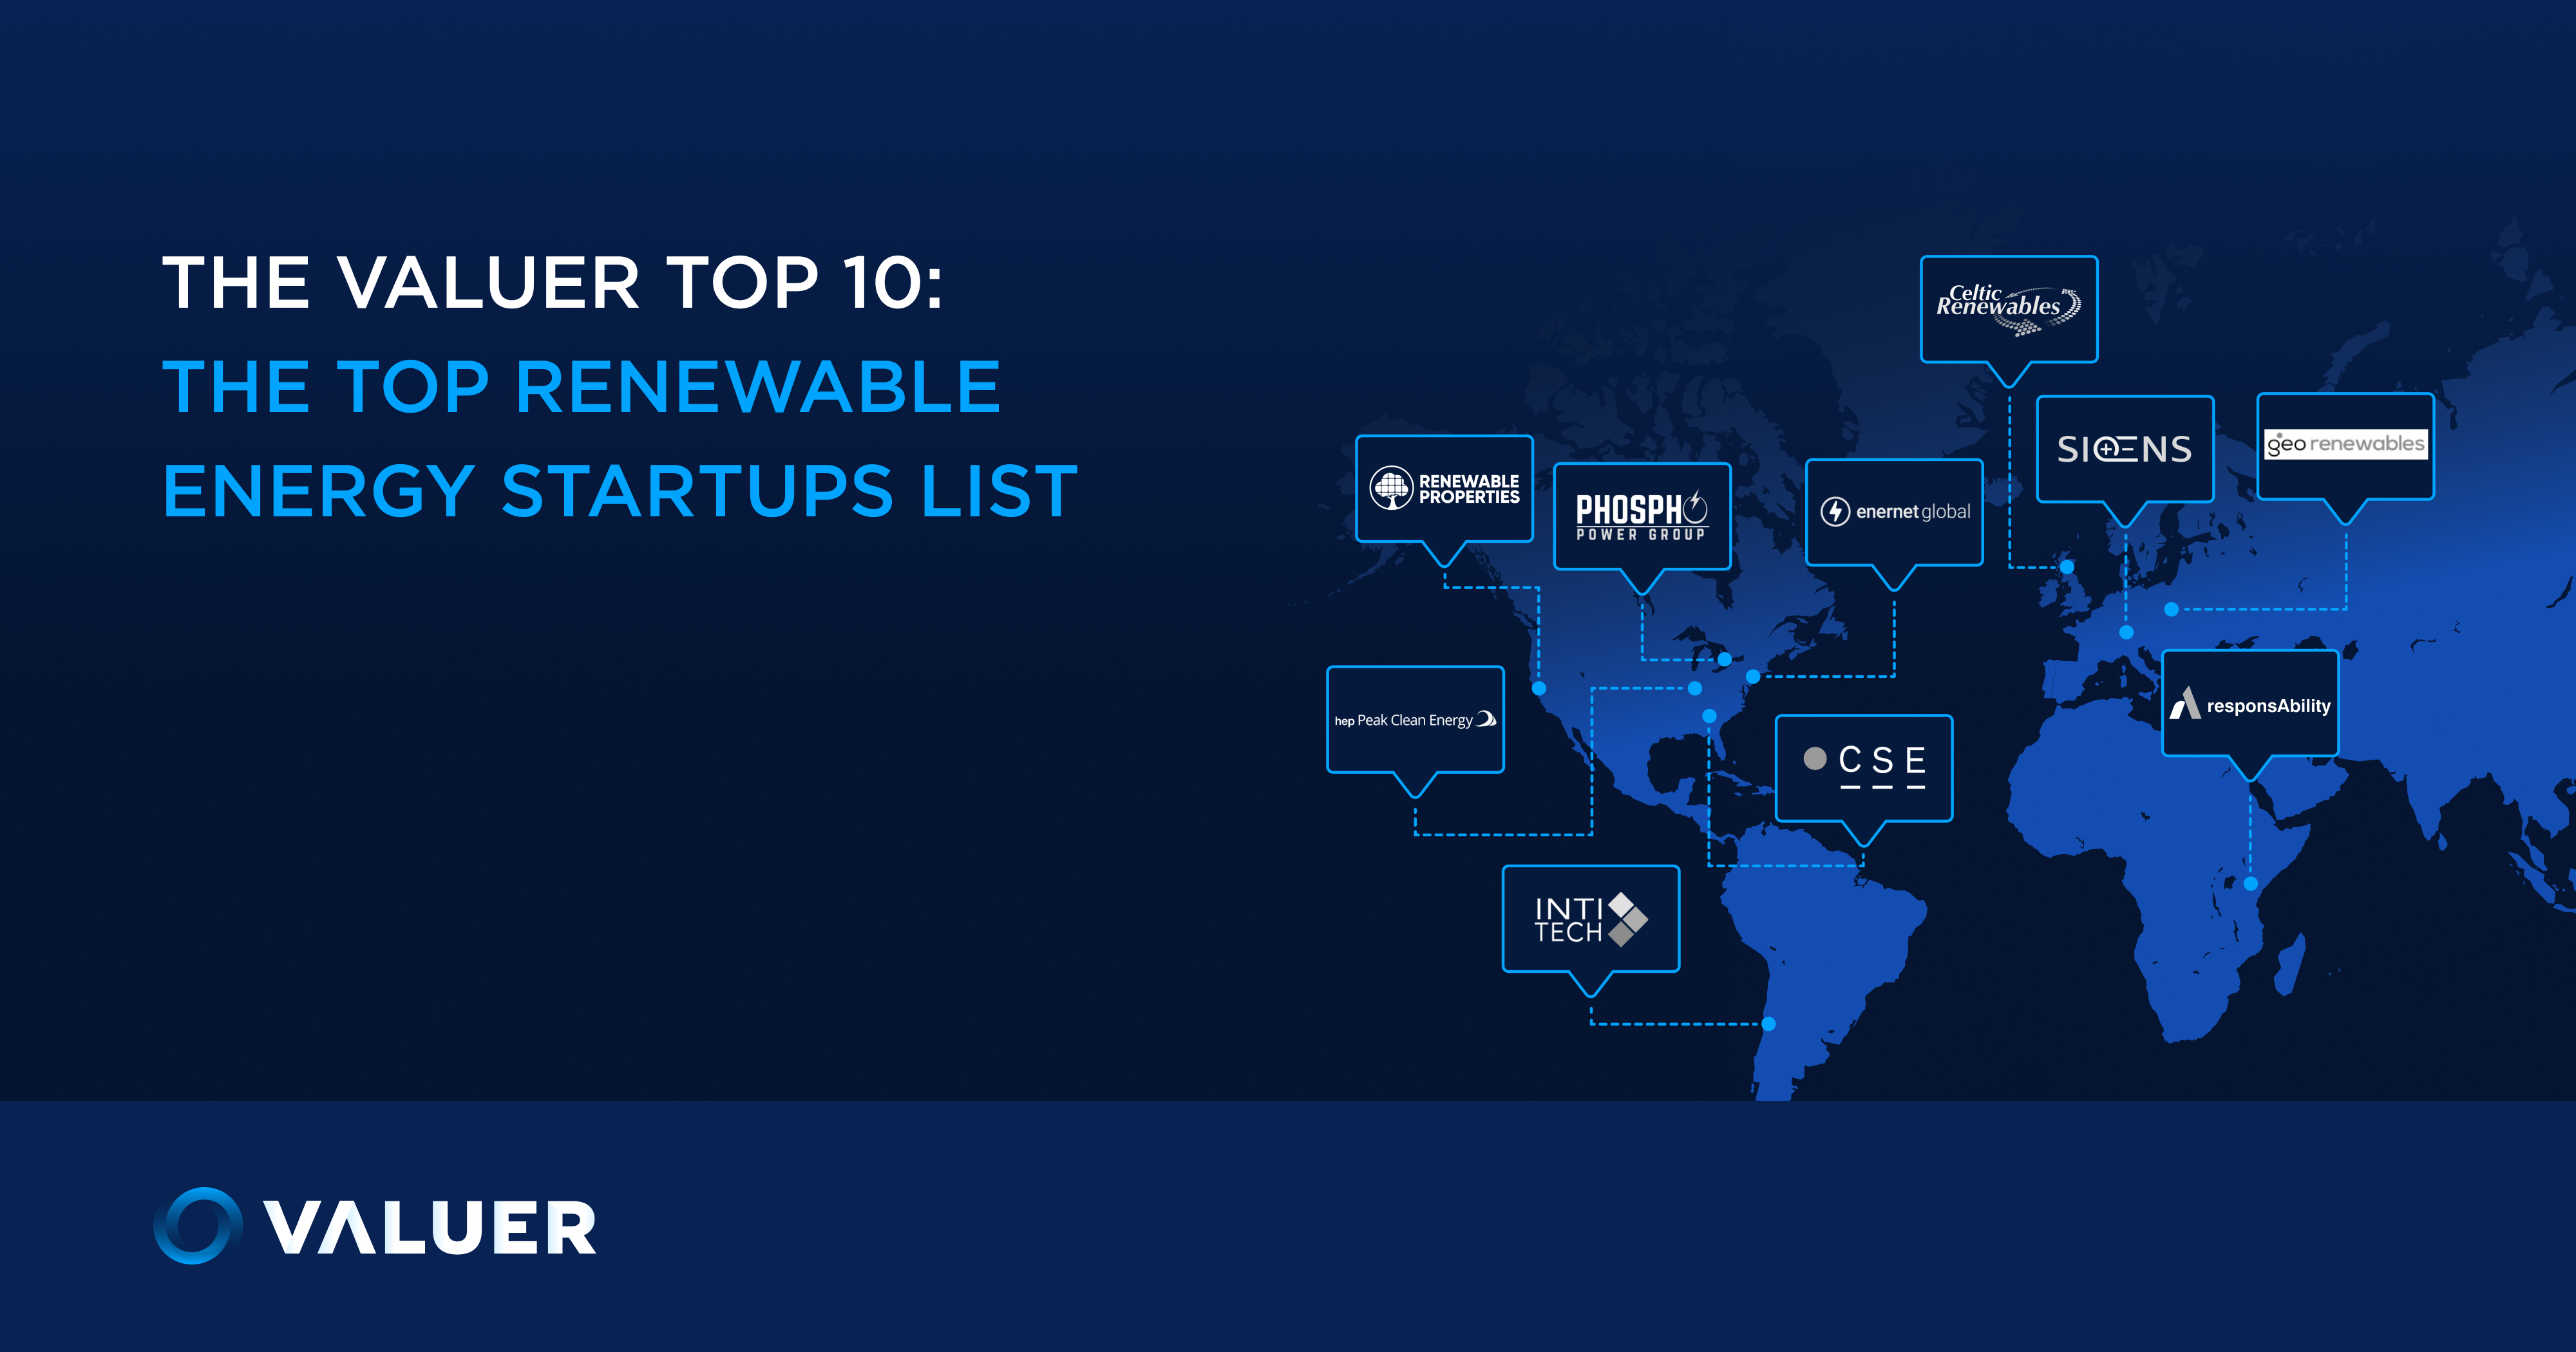 The Valuer Top 10: The Top Renewable Energy Startups List